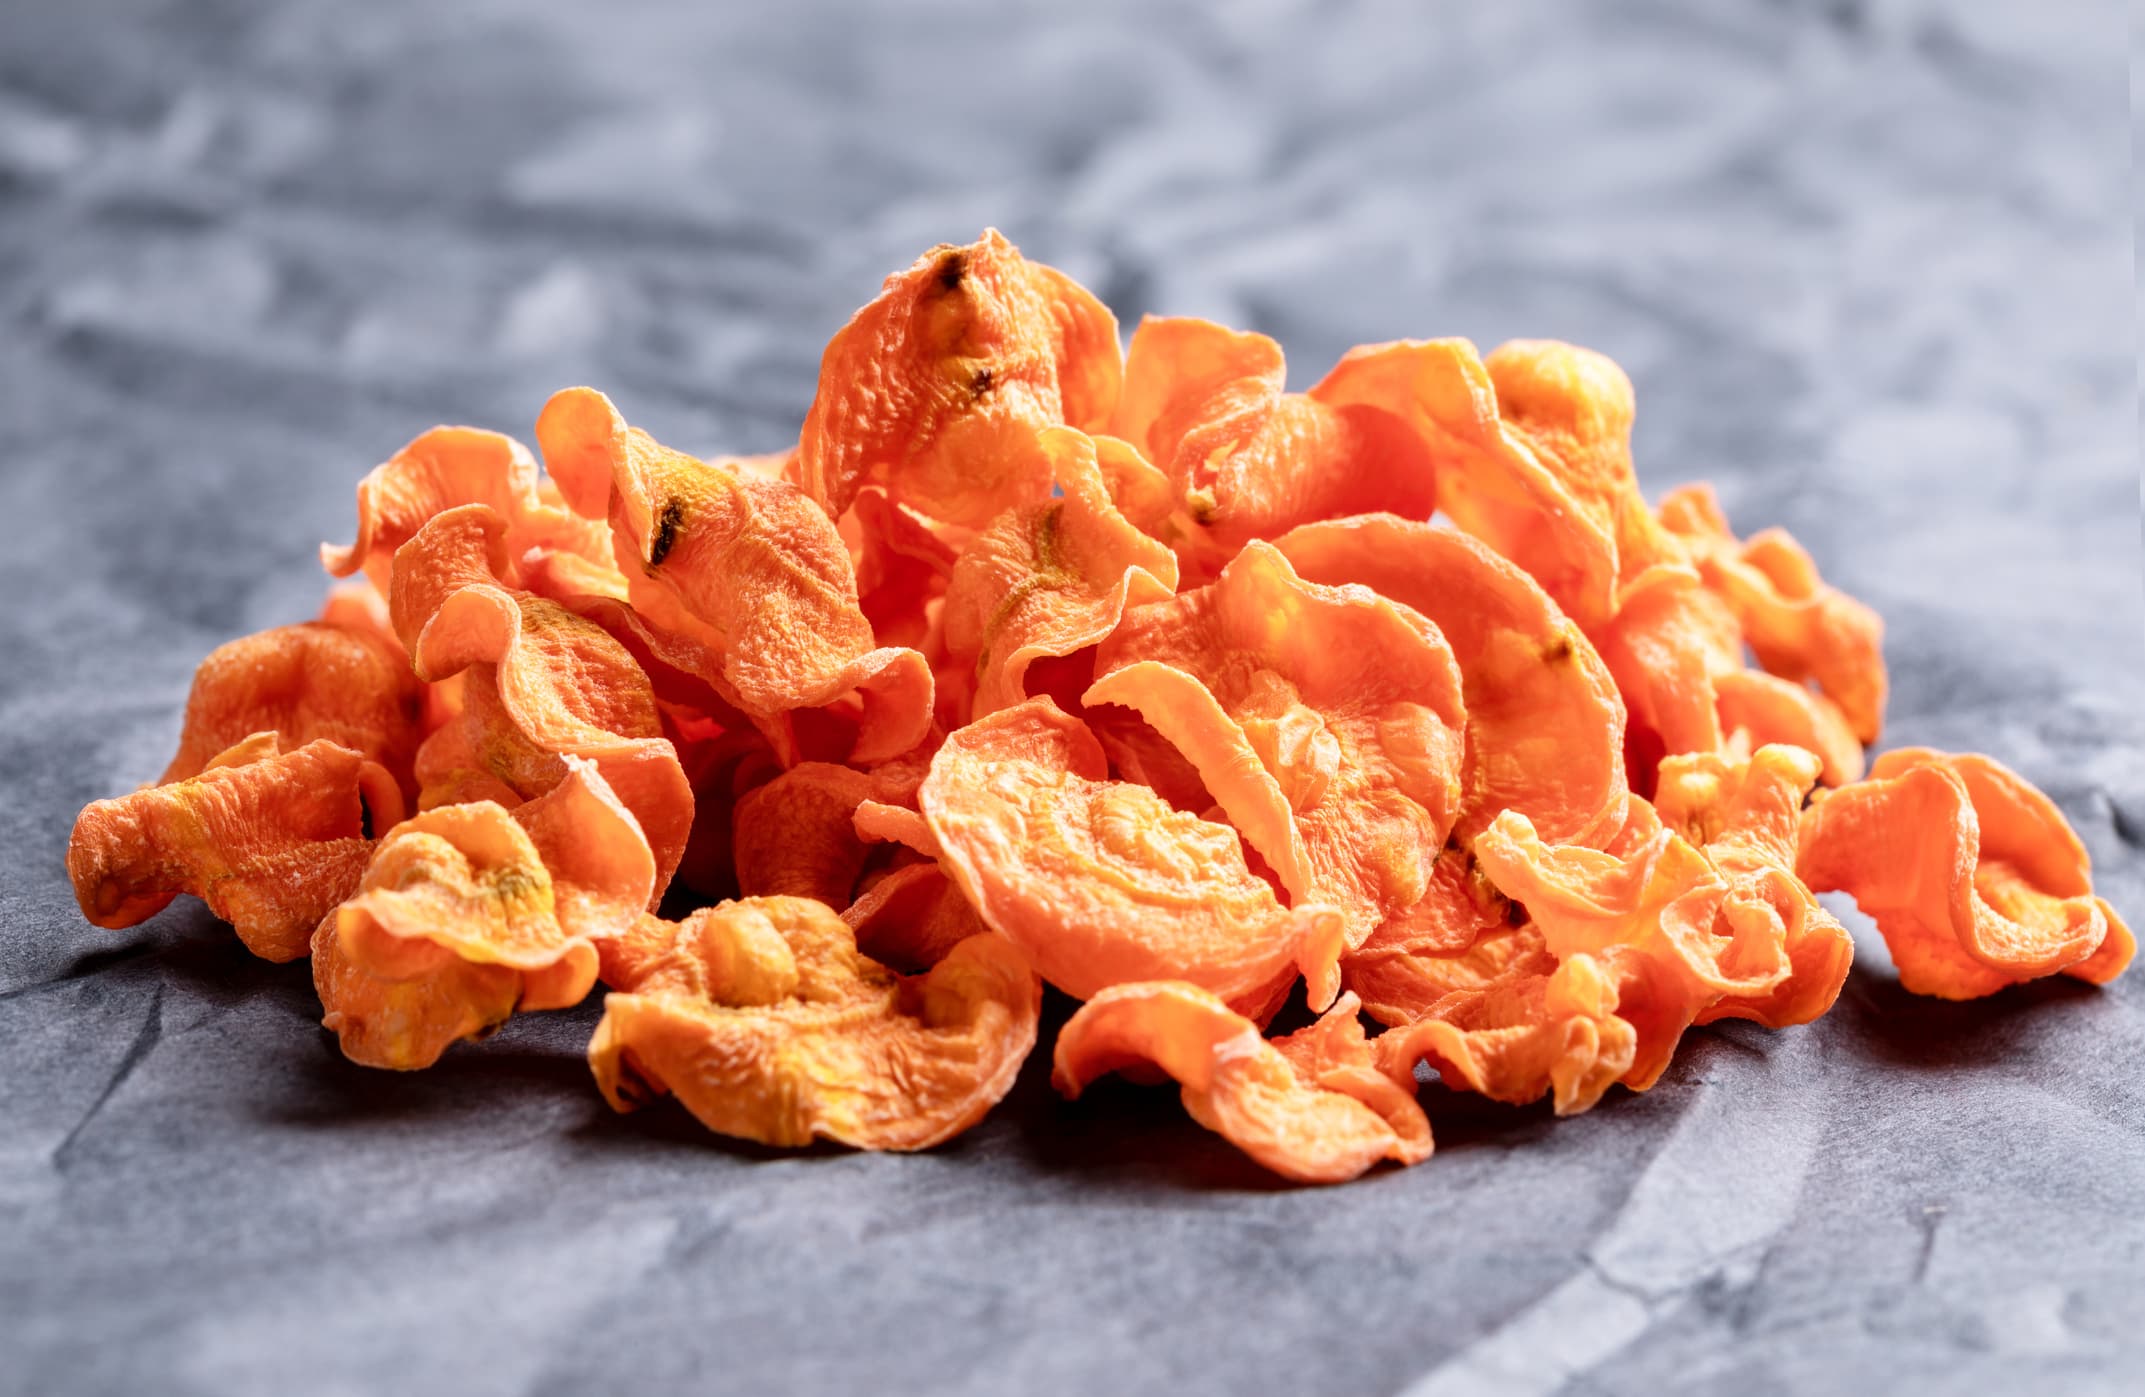 Front view to small bunch of orange vegetable carrot chips on rumpled black wrapping paper. Natural healthy vegetable snack. Alternative to ready-made chips.